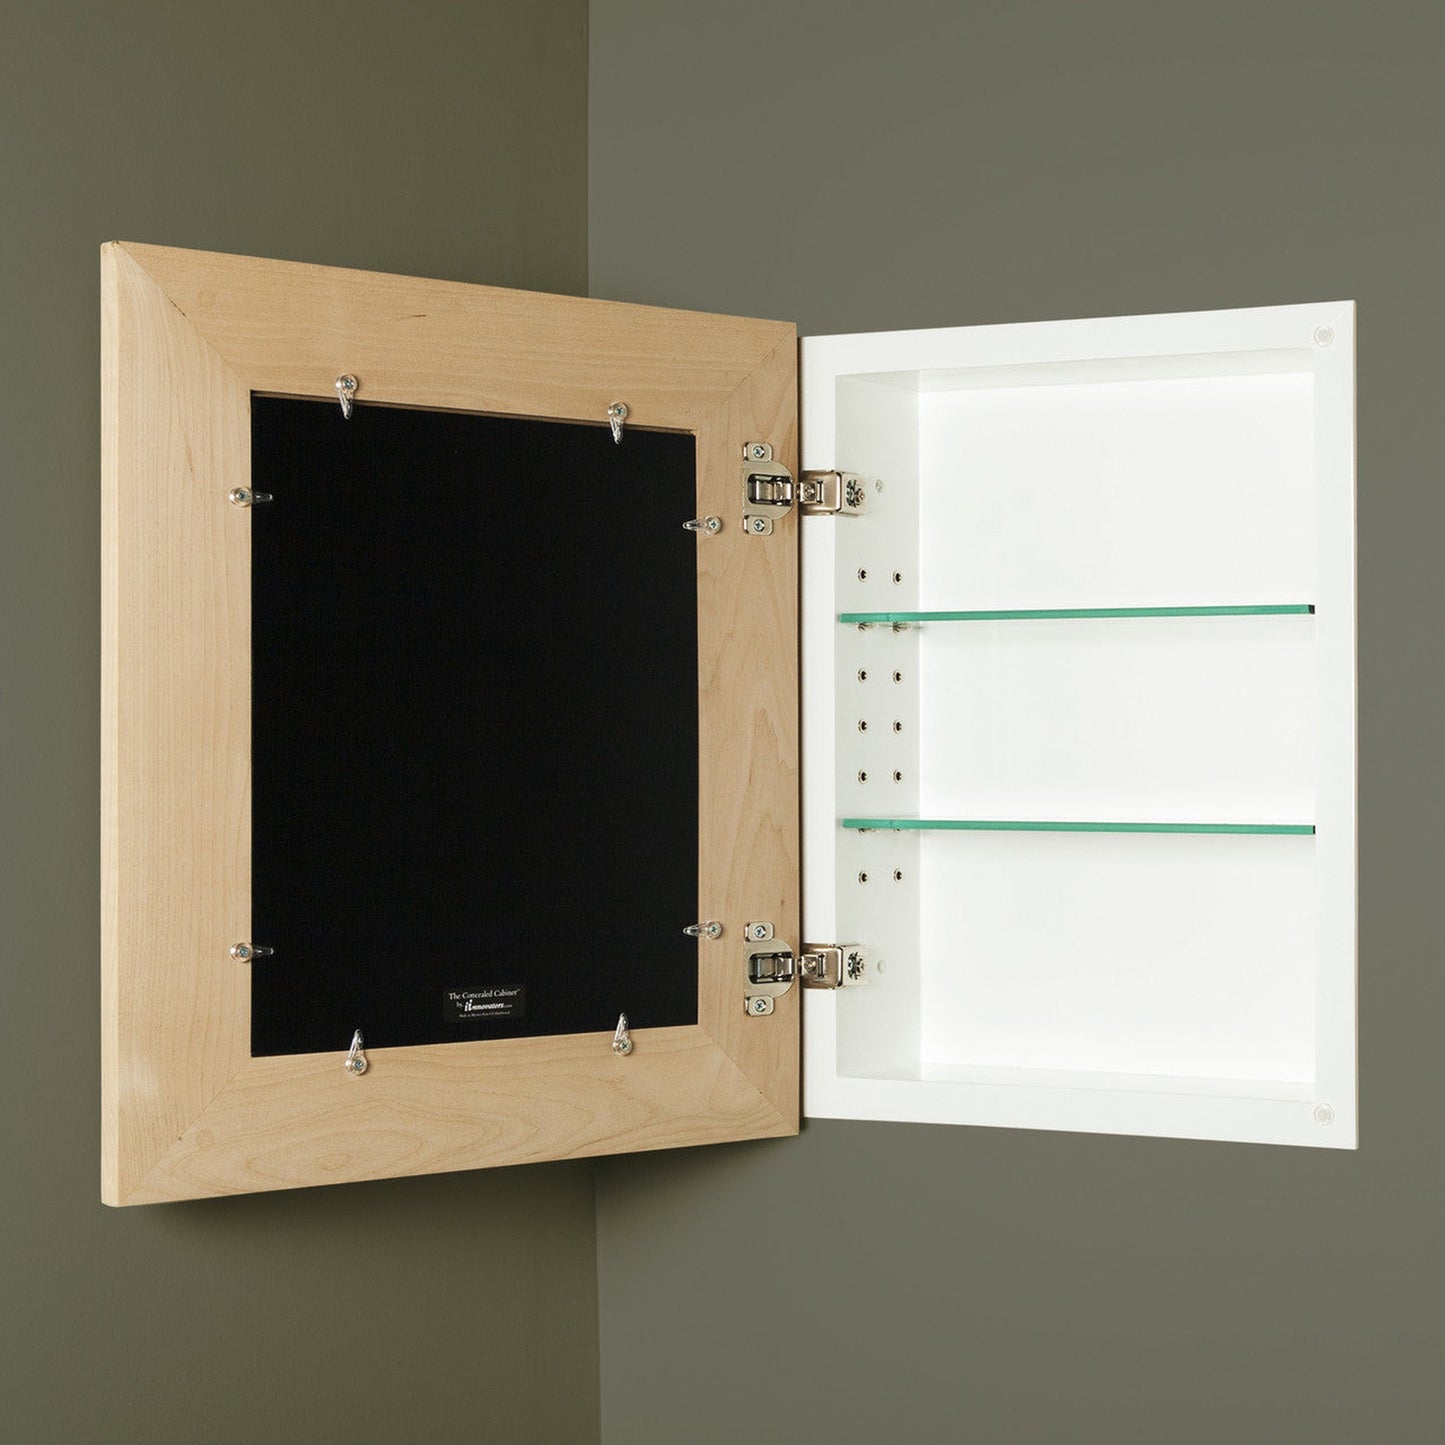 Fox Hollow Furnishings 13" x 16" Unfinished Flat Edge Special 3" Depth Mirrored Medicine Cabinet